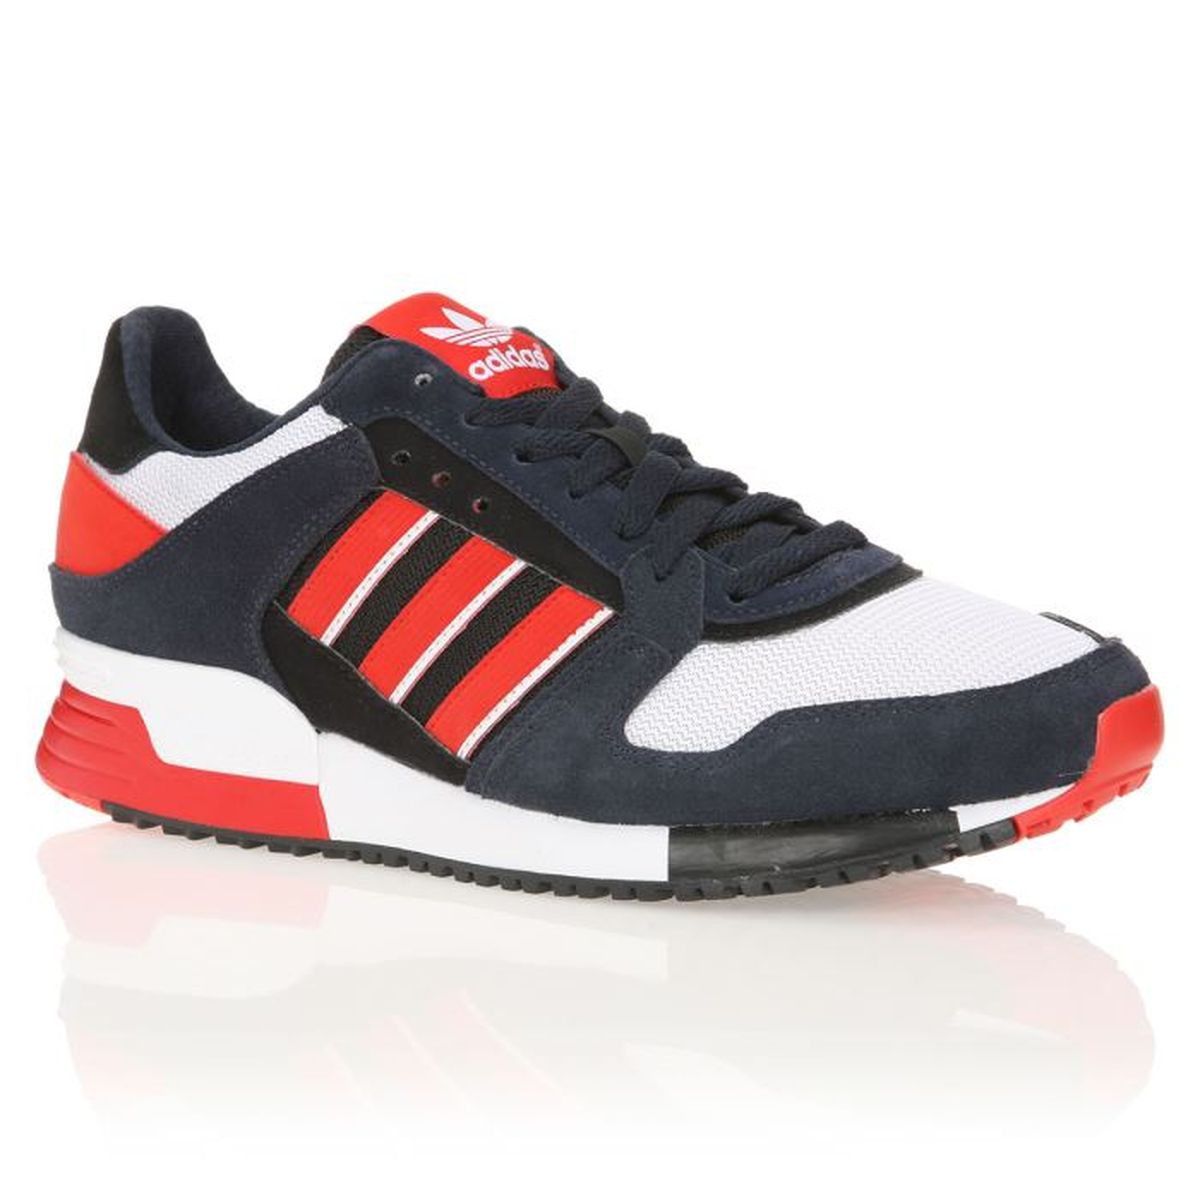 adidas zx 630 homme gris